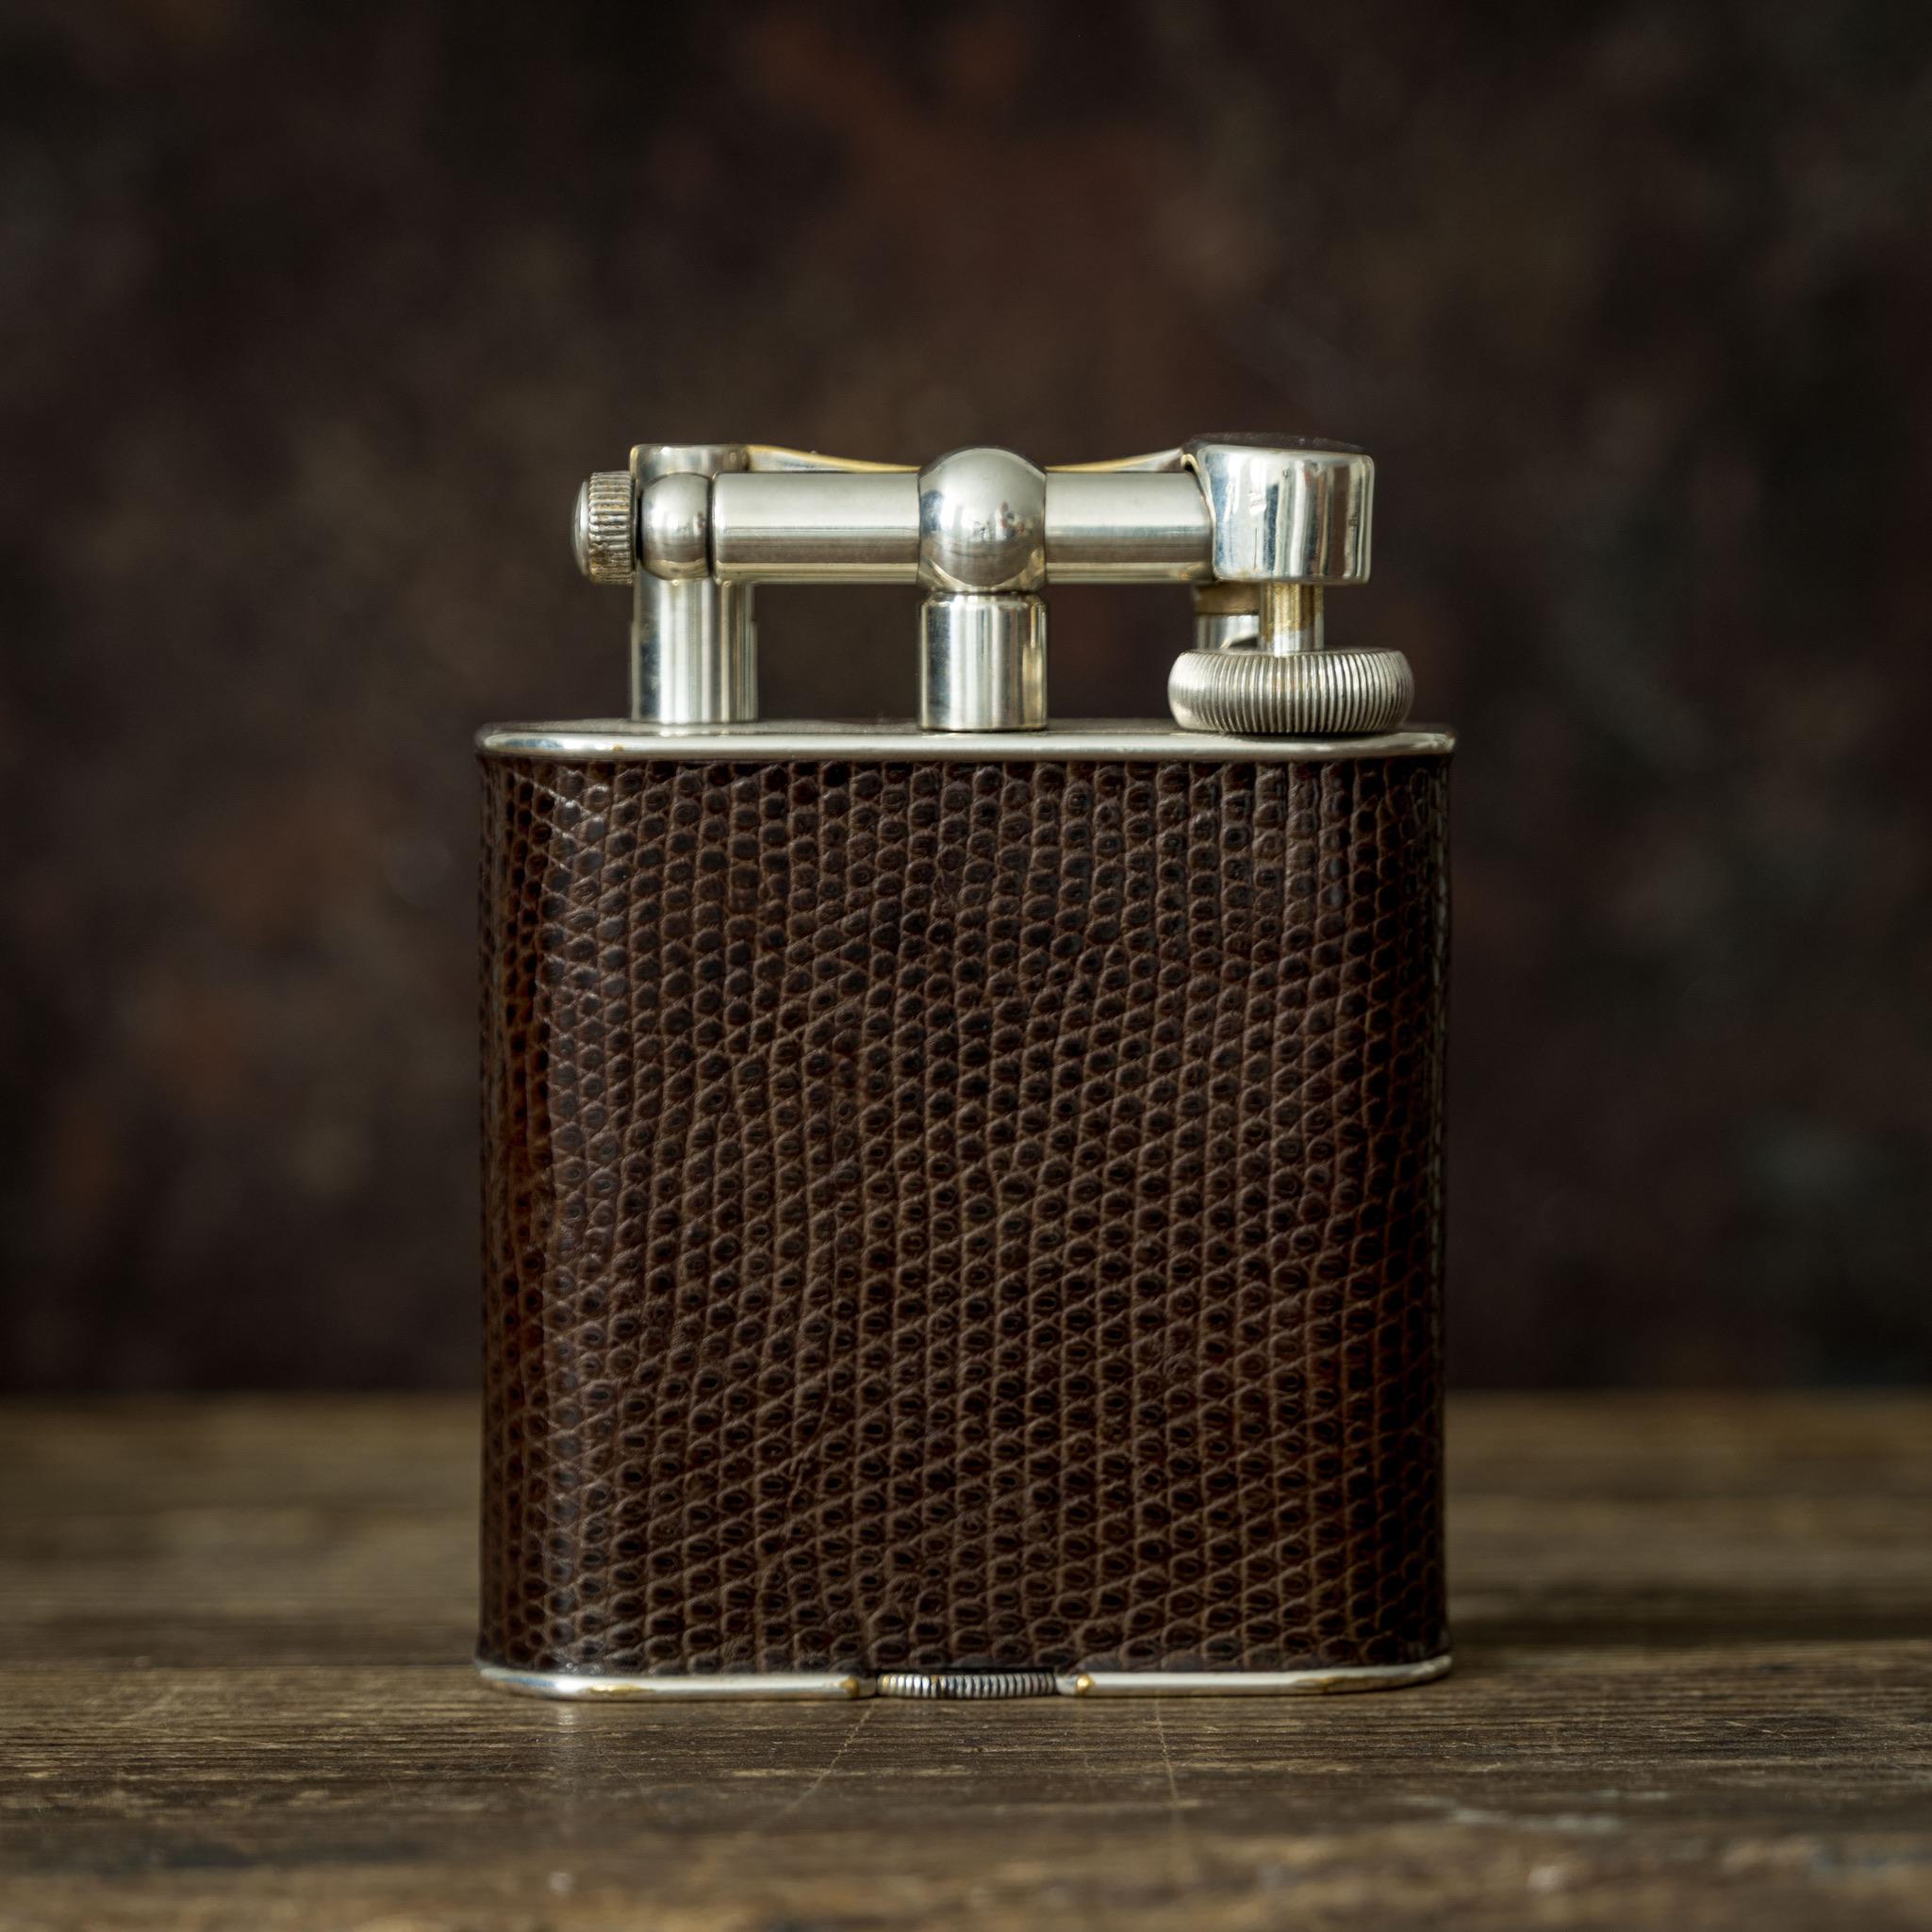 An unusual silver plated Dunhill 'Giant' table or desk lighter with Lizard skin covering to the body; circa 1950. The 'Giant' lighter was first seen in the Dunhill catalogue in 1929 and was an immediate success.

Dimensions: 10.5 cm/4? inches